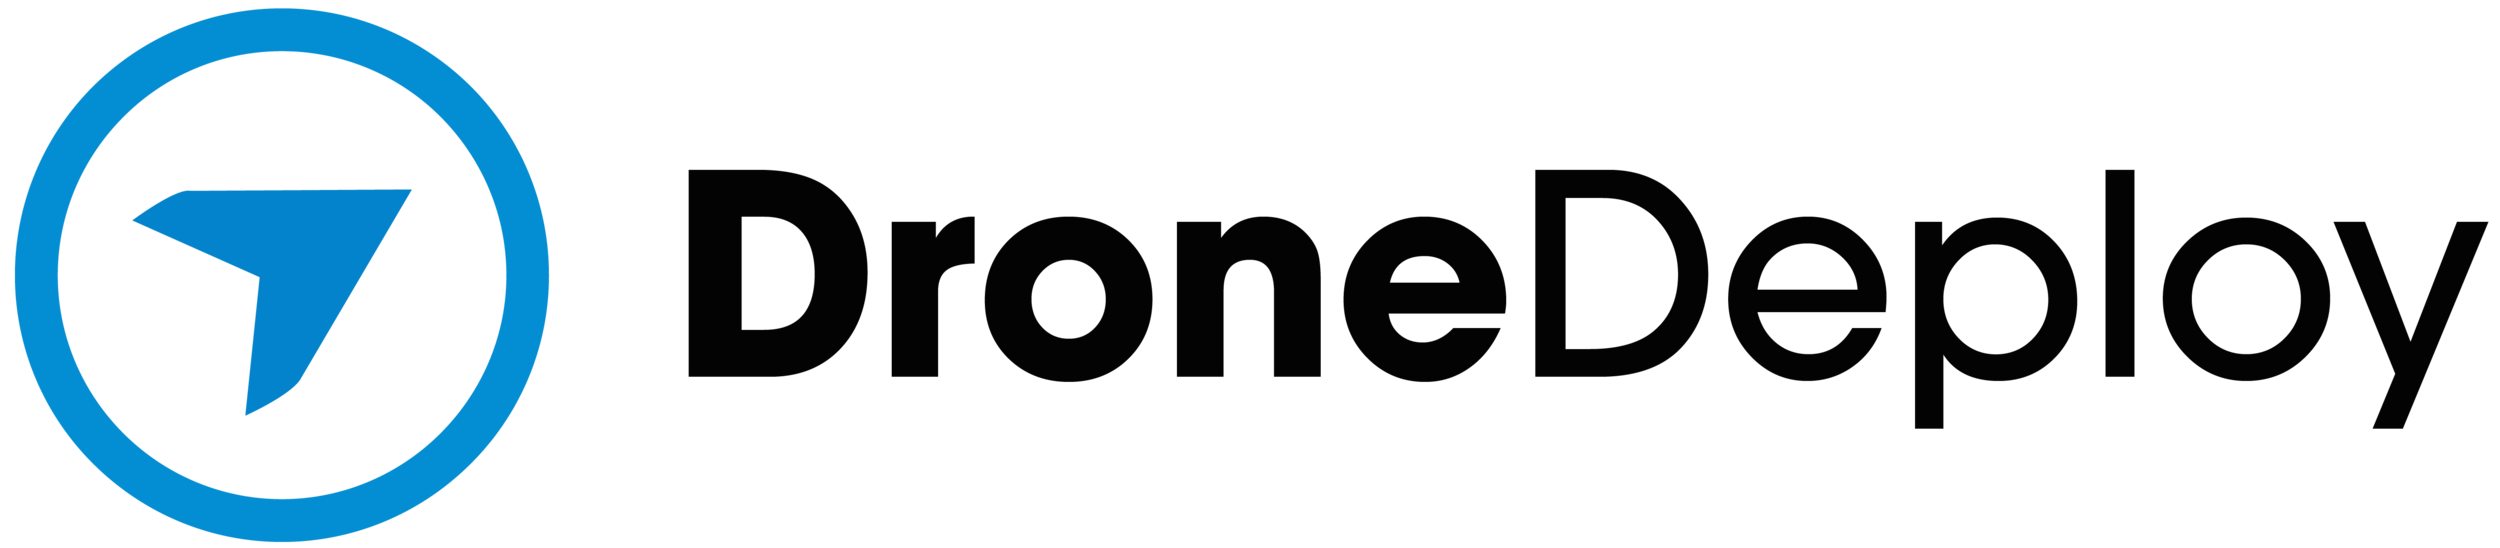 DroneDeploy-logo-lg.png